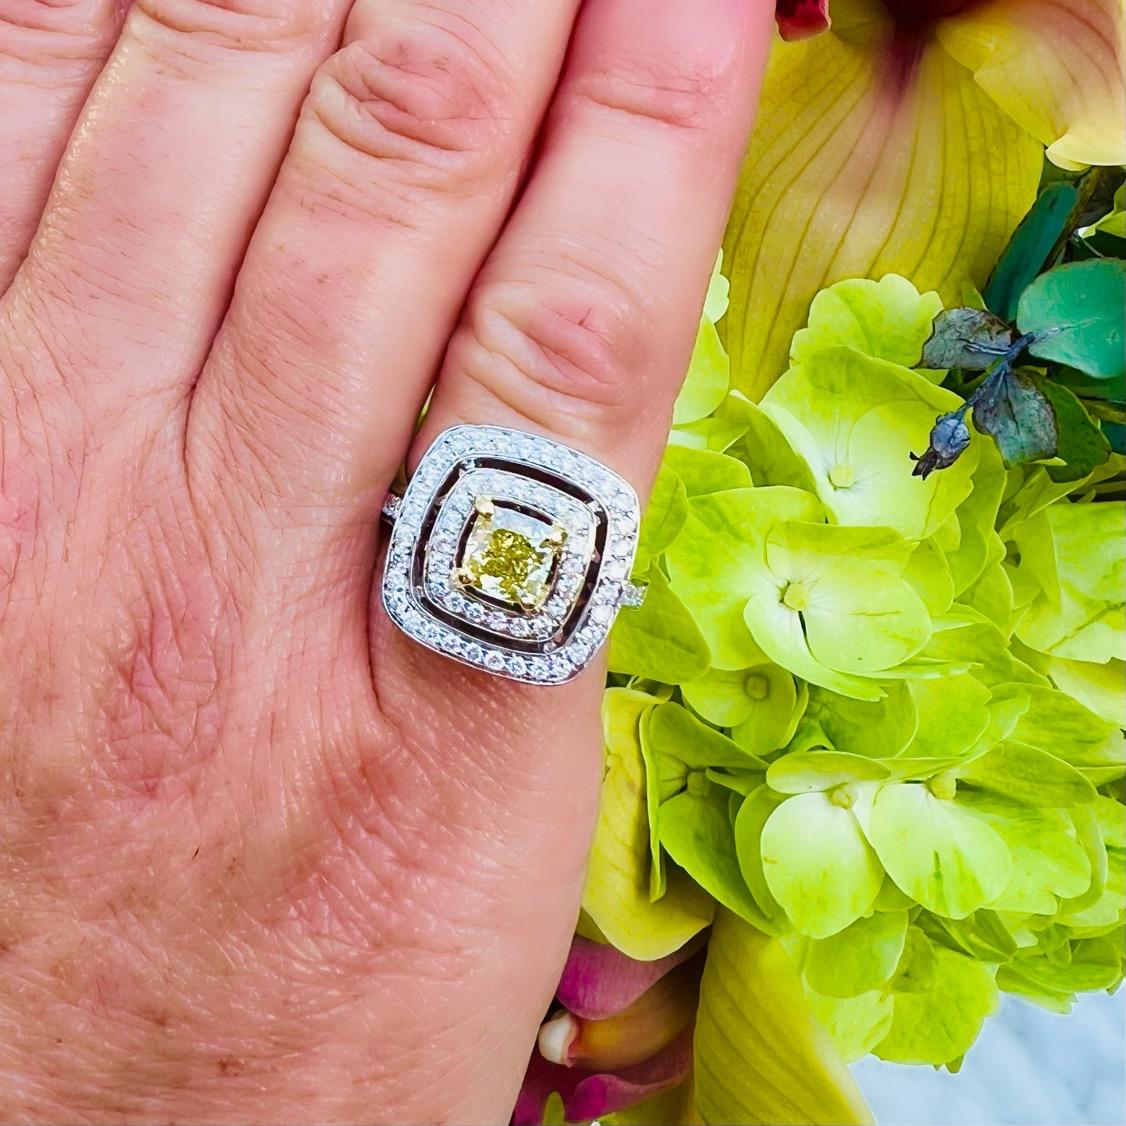 A true showstopper. This 18 karat white gold stunner features a 1.01 carat Cushion Cut Yellow Diamond surrounded by a double halo of white diamonds. The vibrant yellow diamond has been graded with SI clarity and delivers a bright, sparkling yellow.